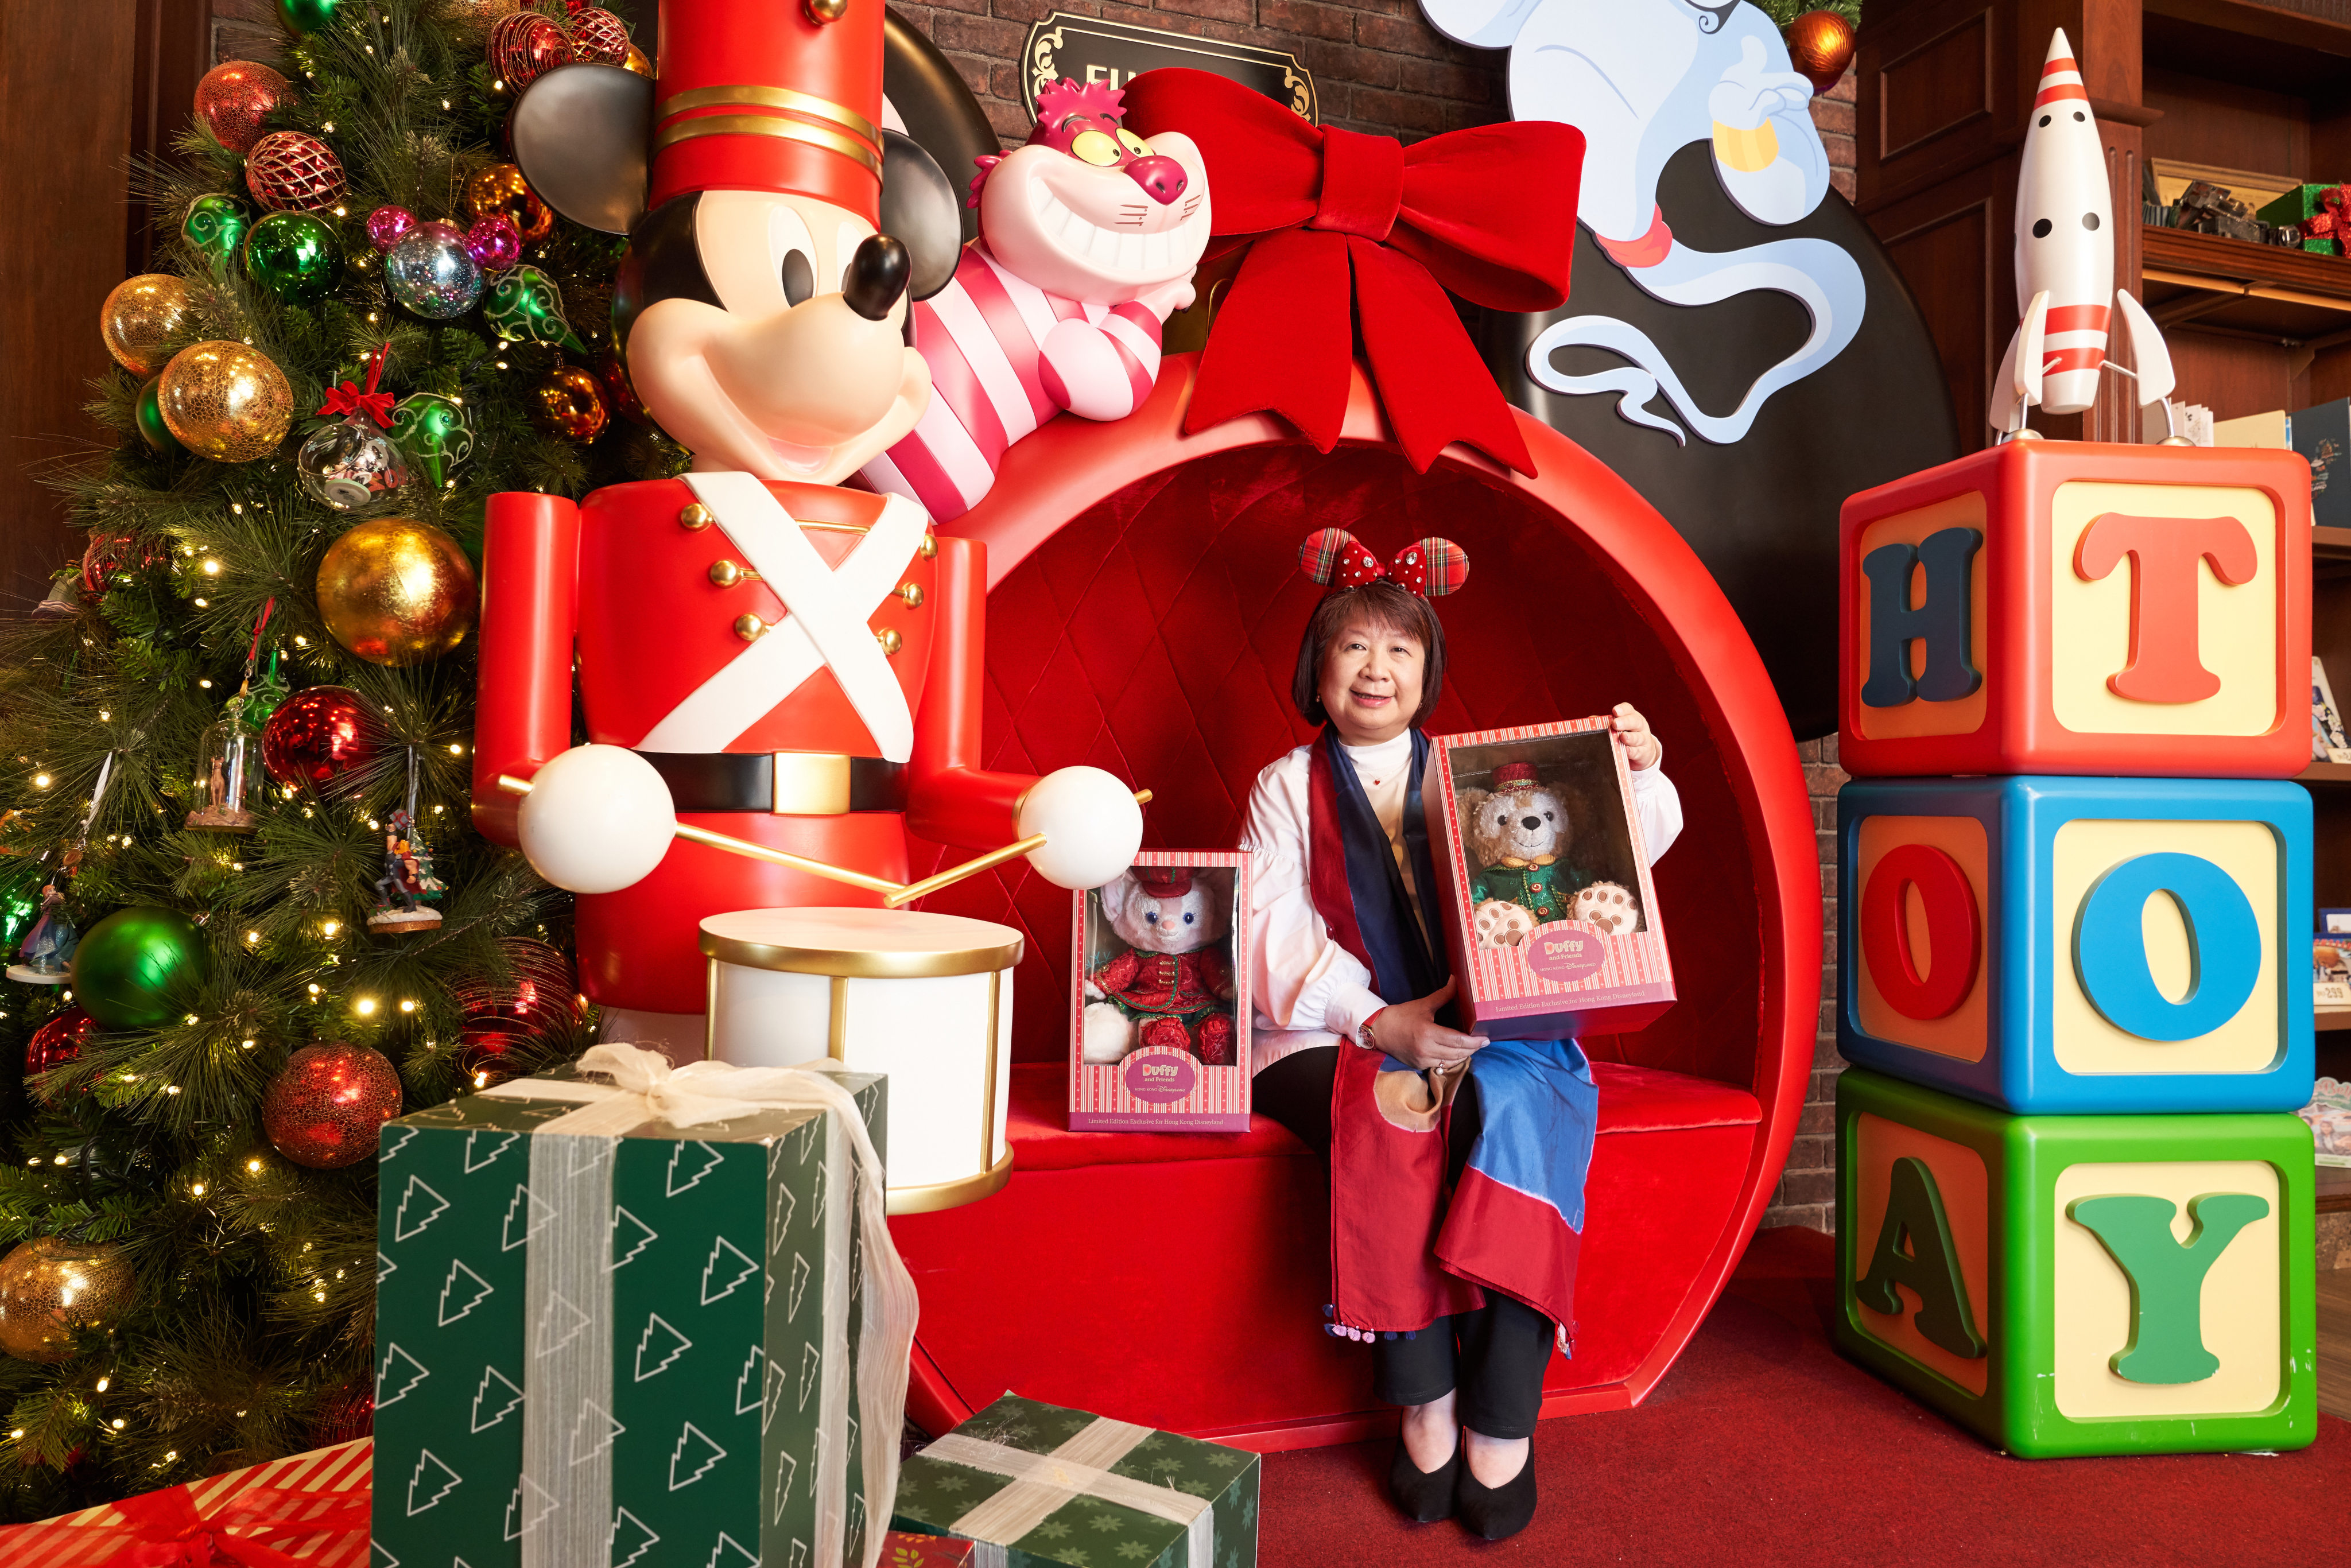 Hong Kong Disneyland hopes to bring joy and positivity to the community through the toy sale, says Mary Lam, director of merchandise. Photo: Handout